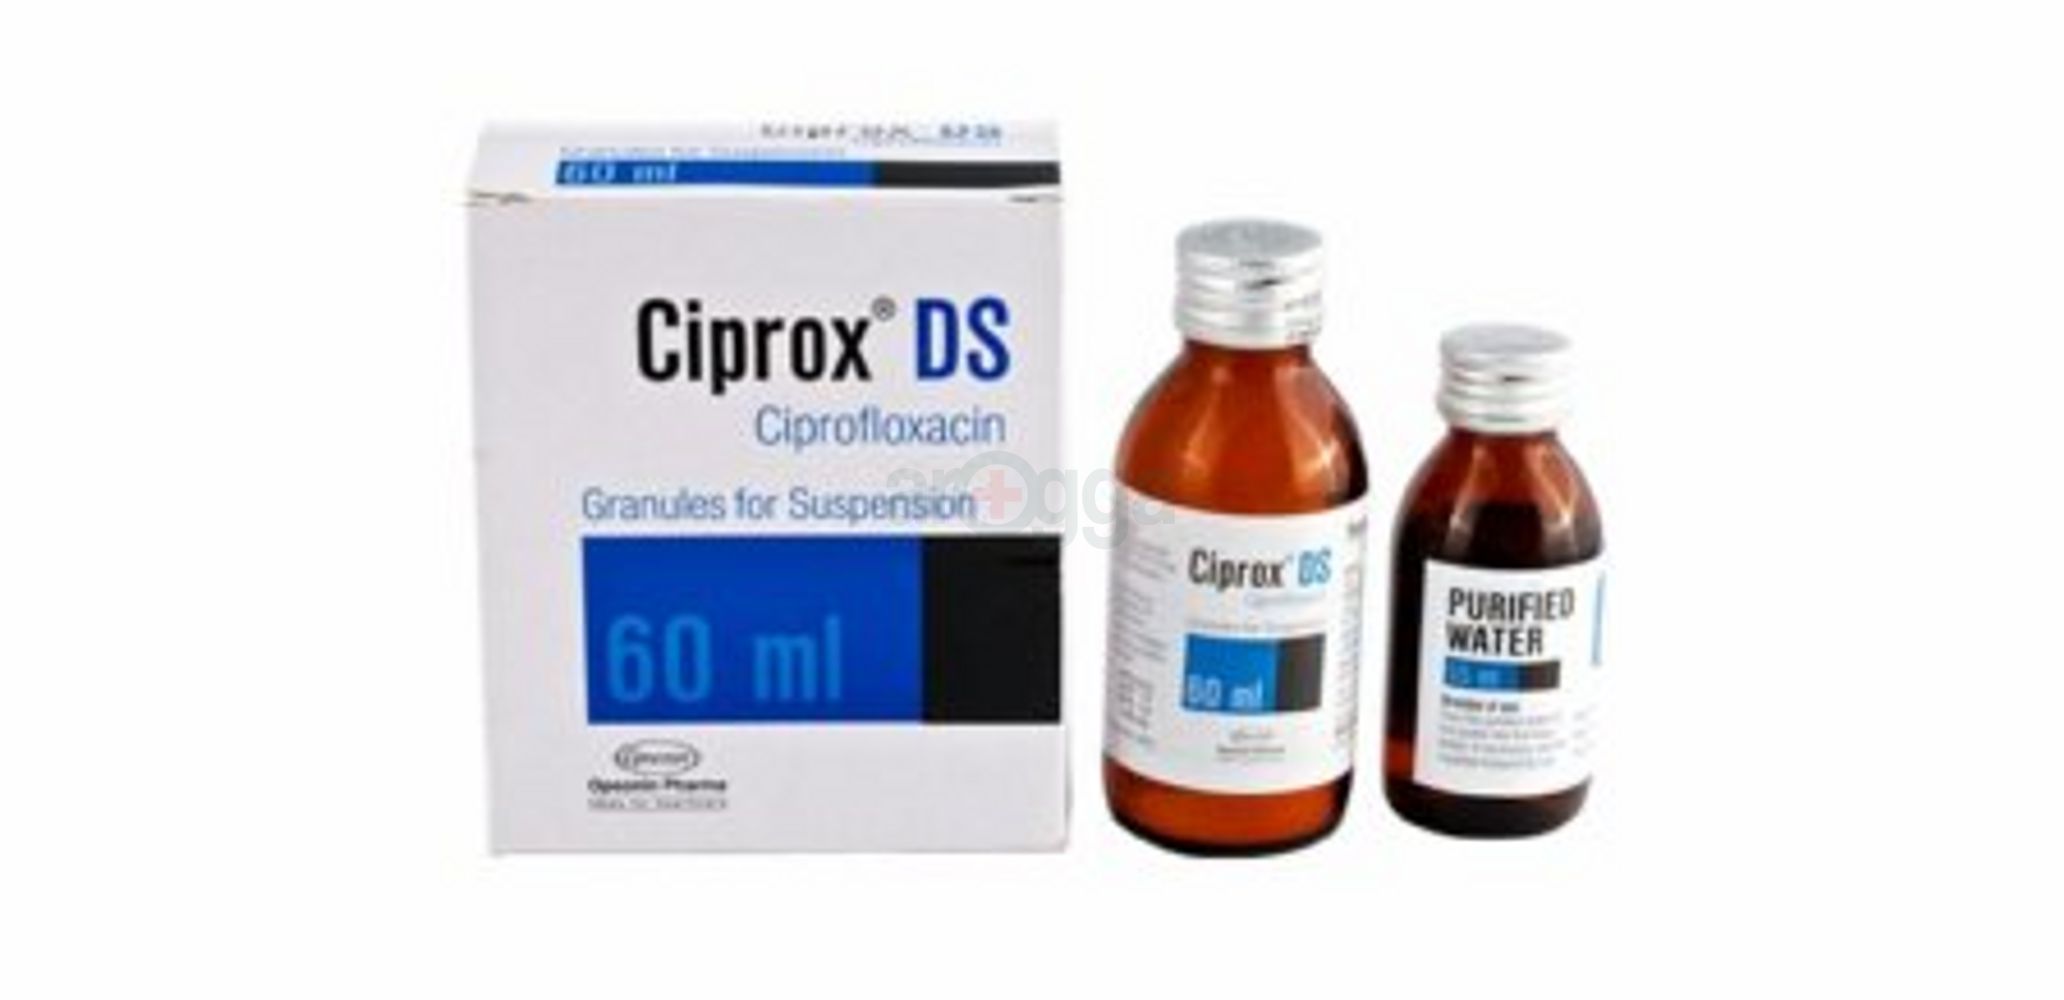 Ciprox DS